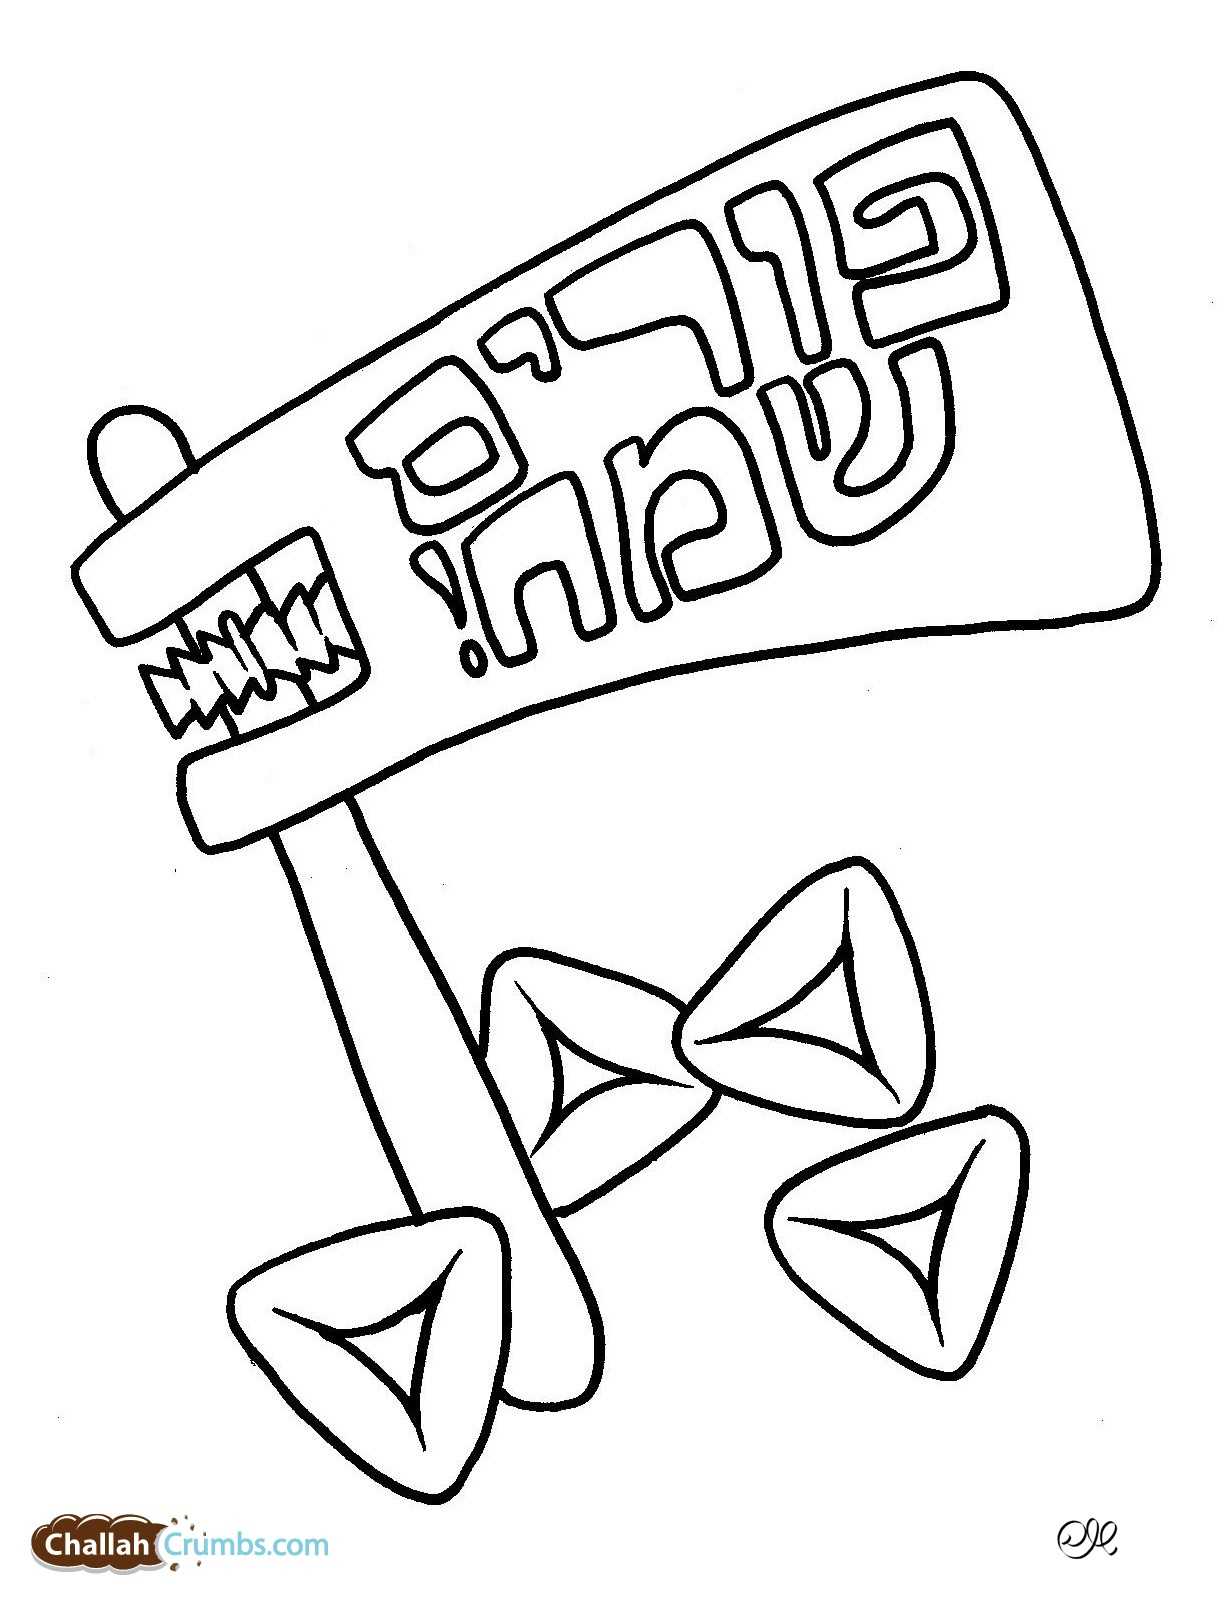 Purim Coloring Page Jewish Holidays Archives Challah Crumbs